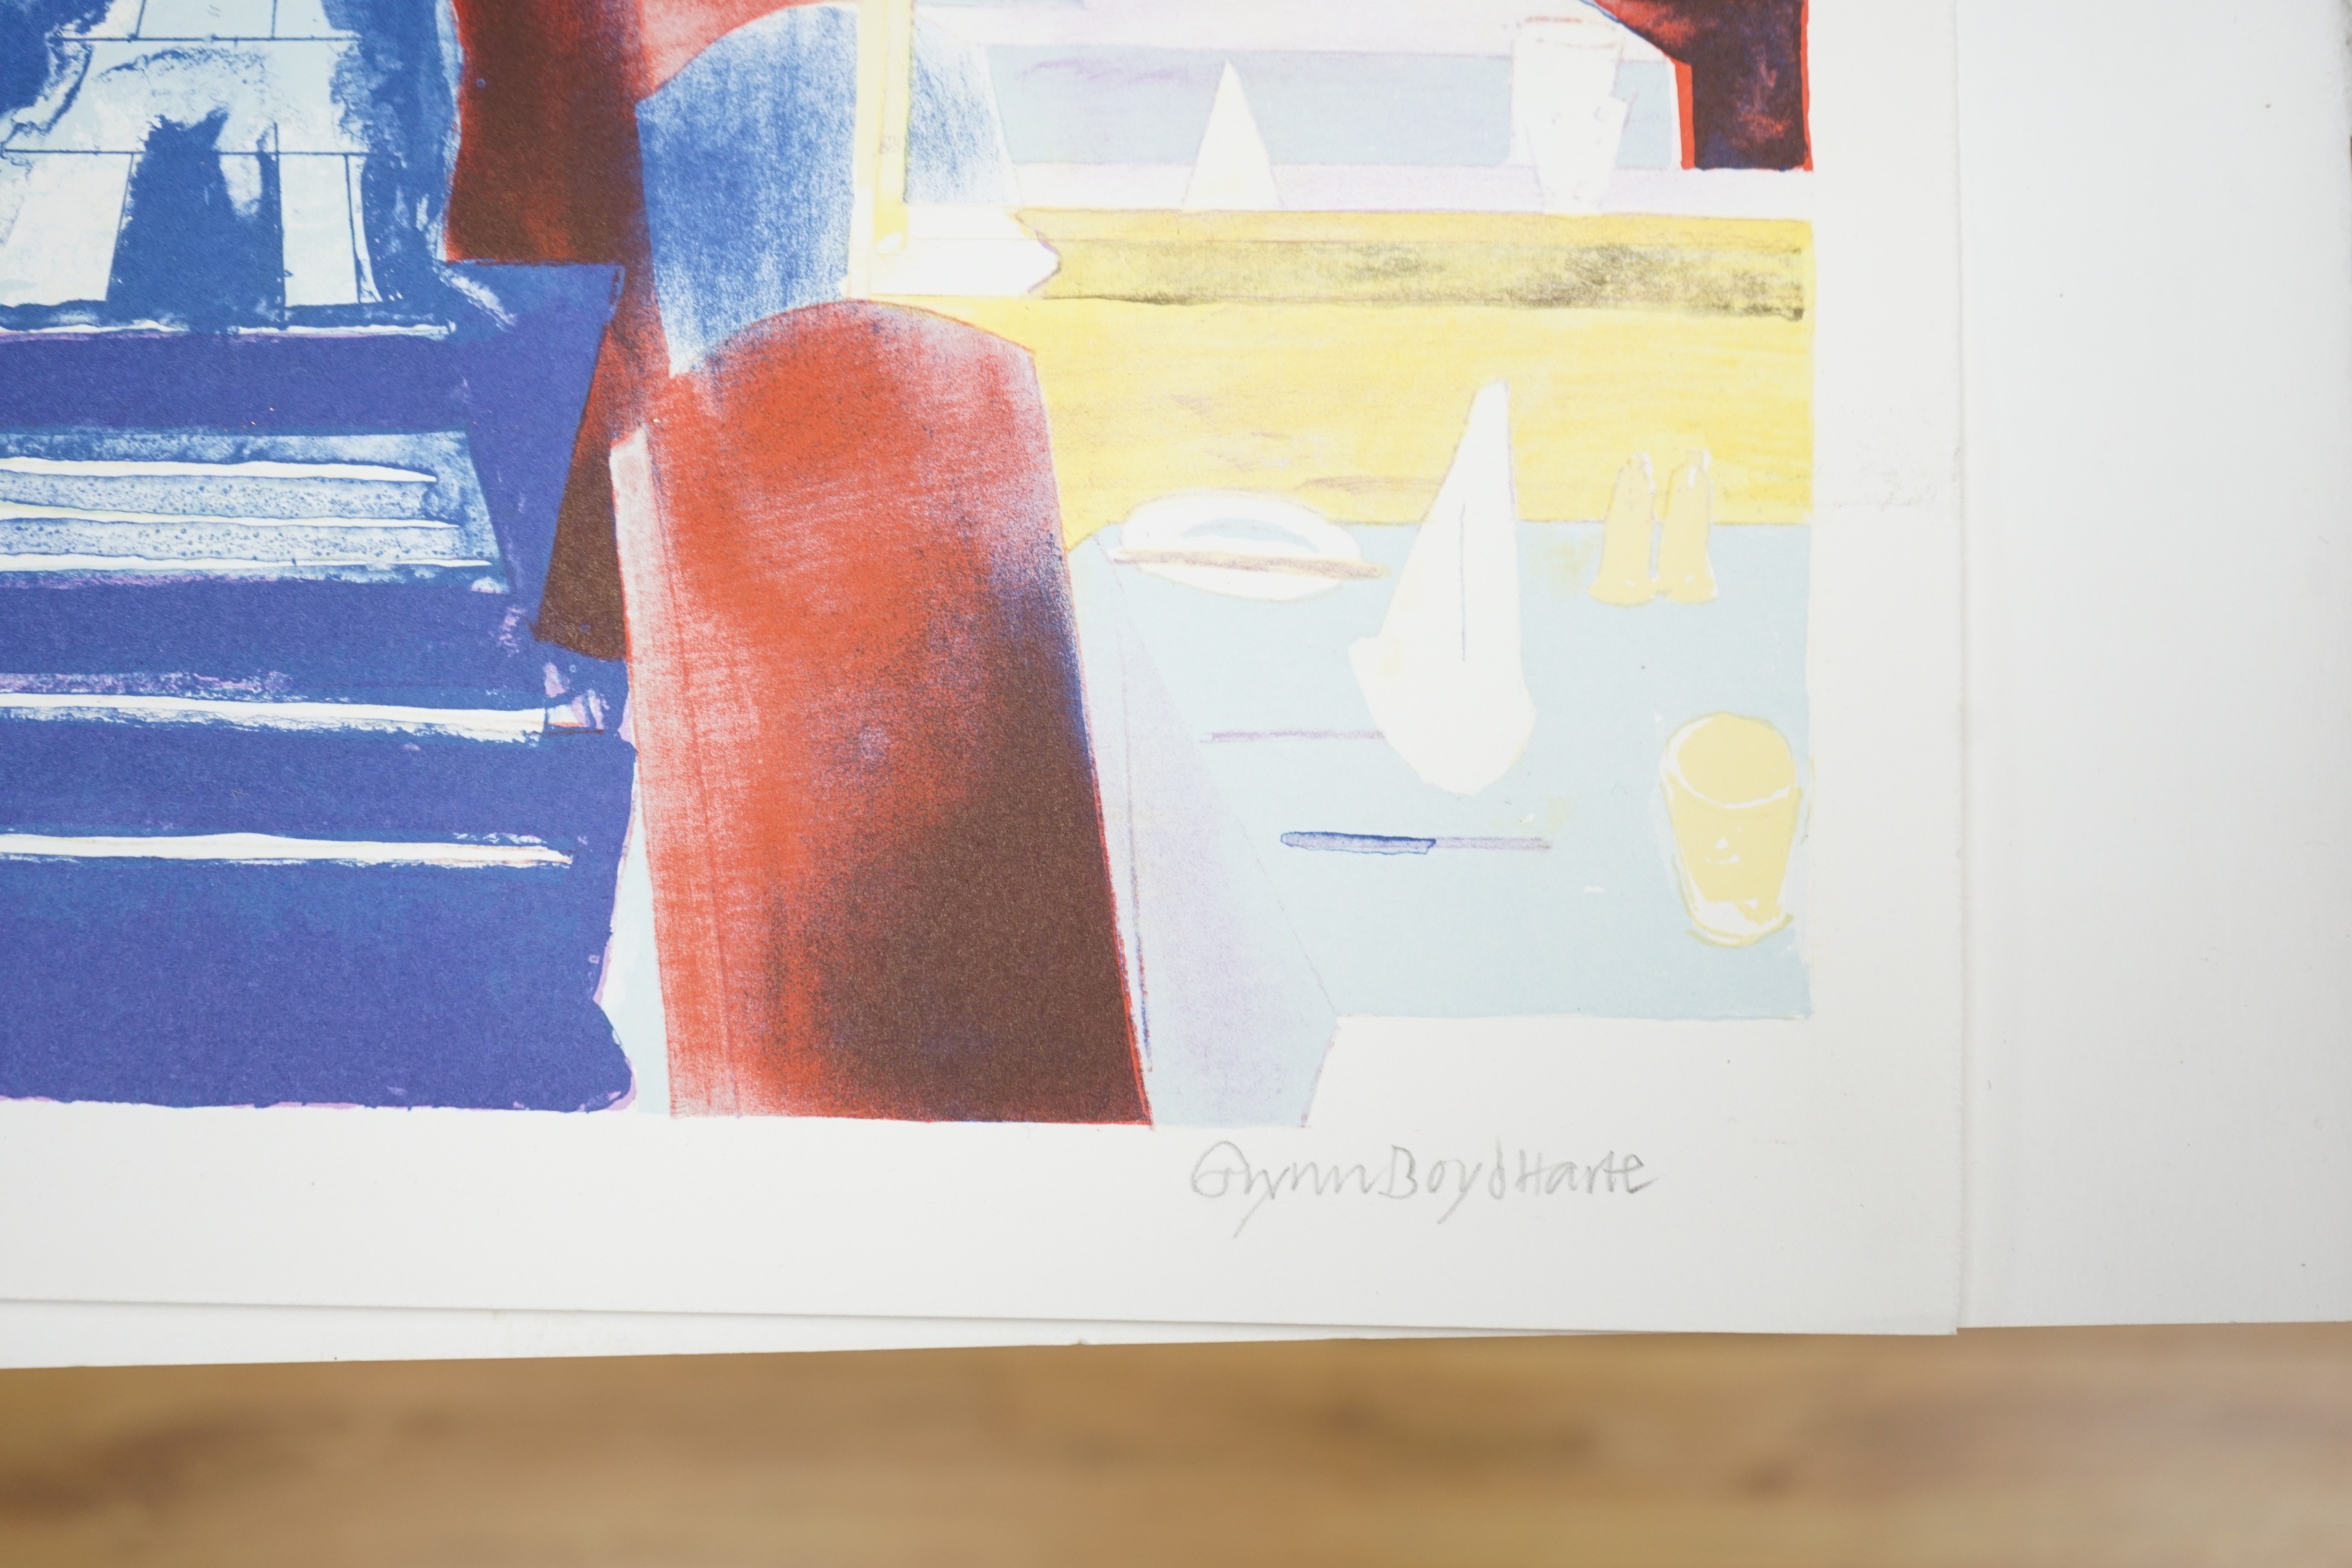 Glynn Boyd Harte (1948-2003), three limited edition prints, Café interior, Pollocks Toy Museum and - Image 2 of 4